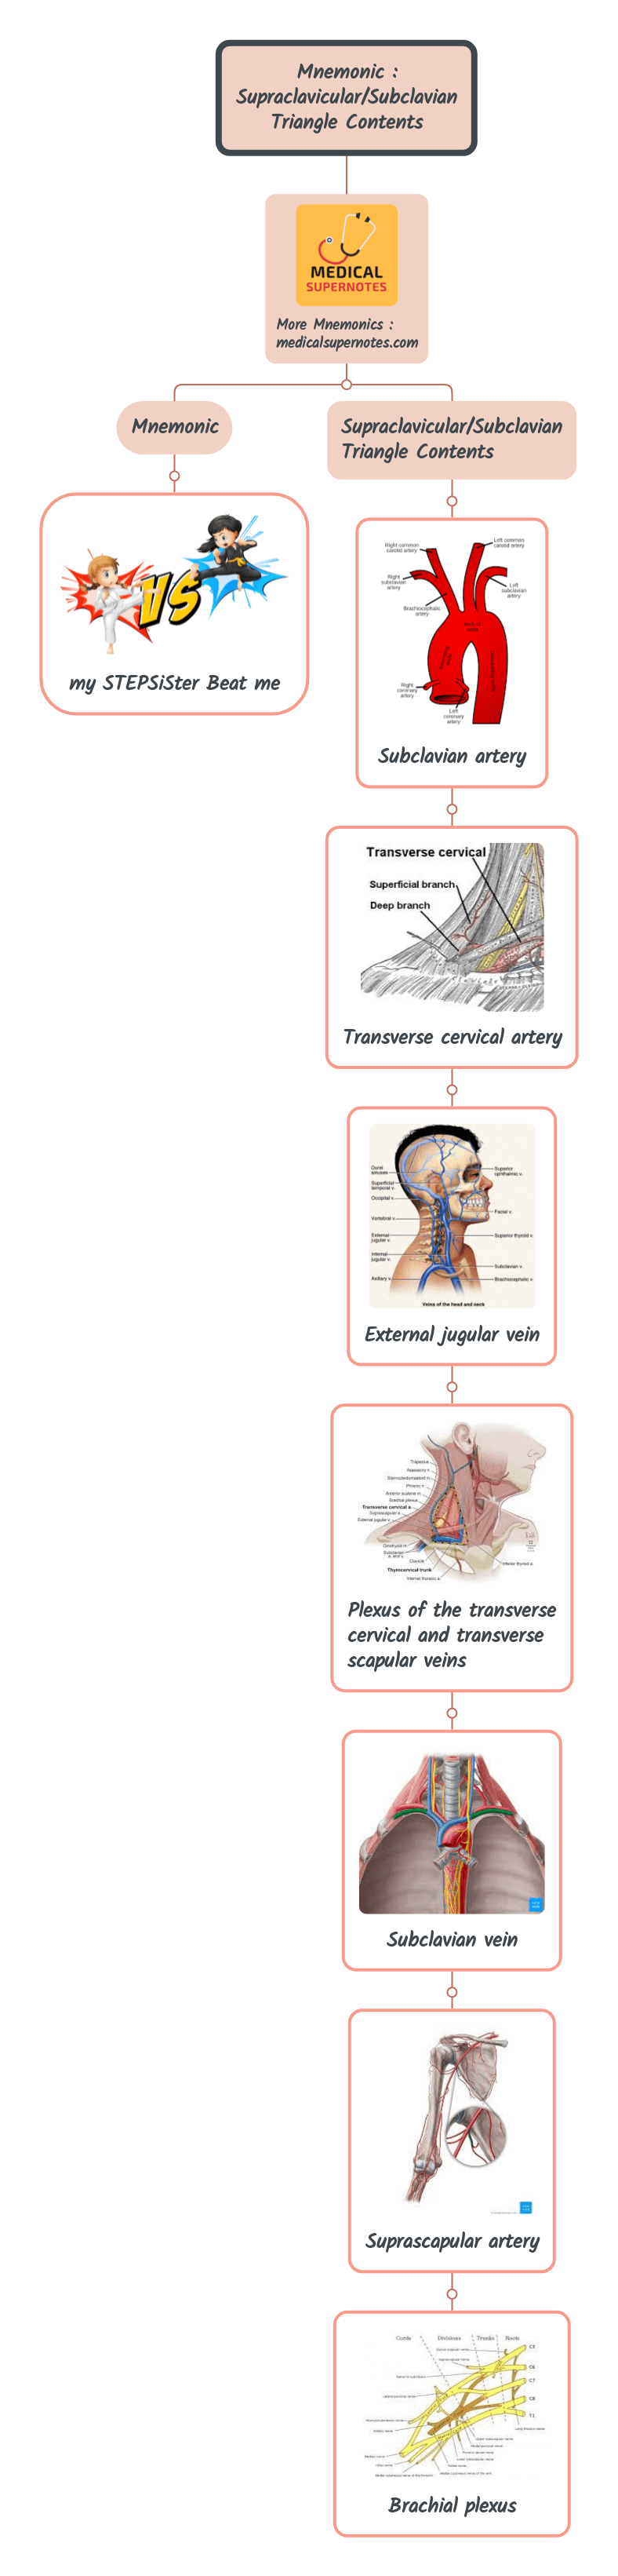 Mnemonic _ Supraclavicular_Subclavian Triangle Contents